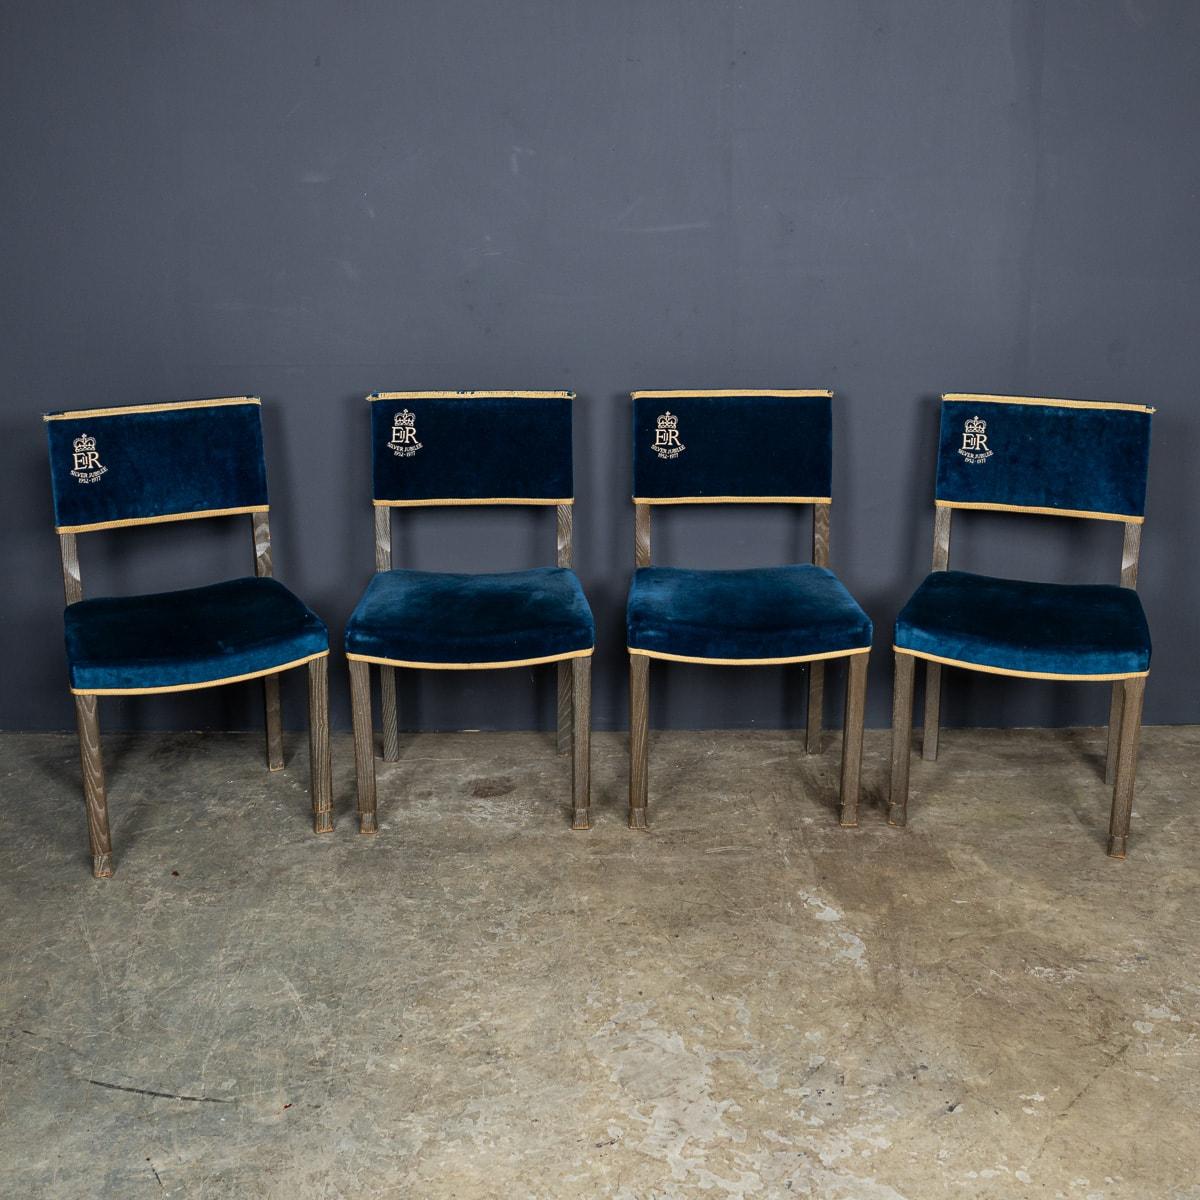 Other Set Of Four Silver Jubilee Commemorative Chairs By Hands Of Wycombe c.1977 For Sale